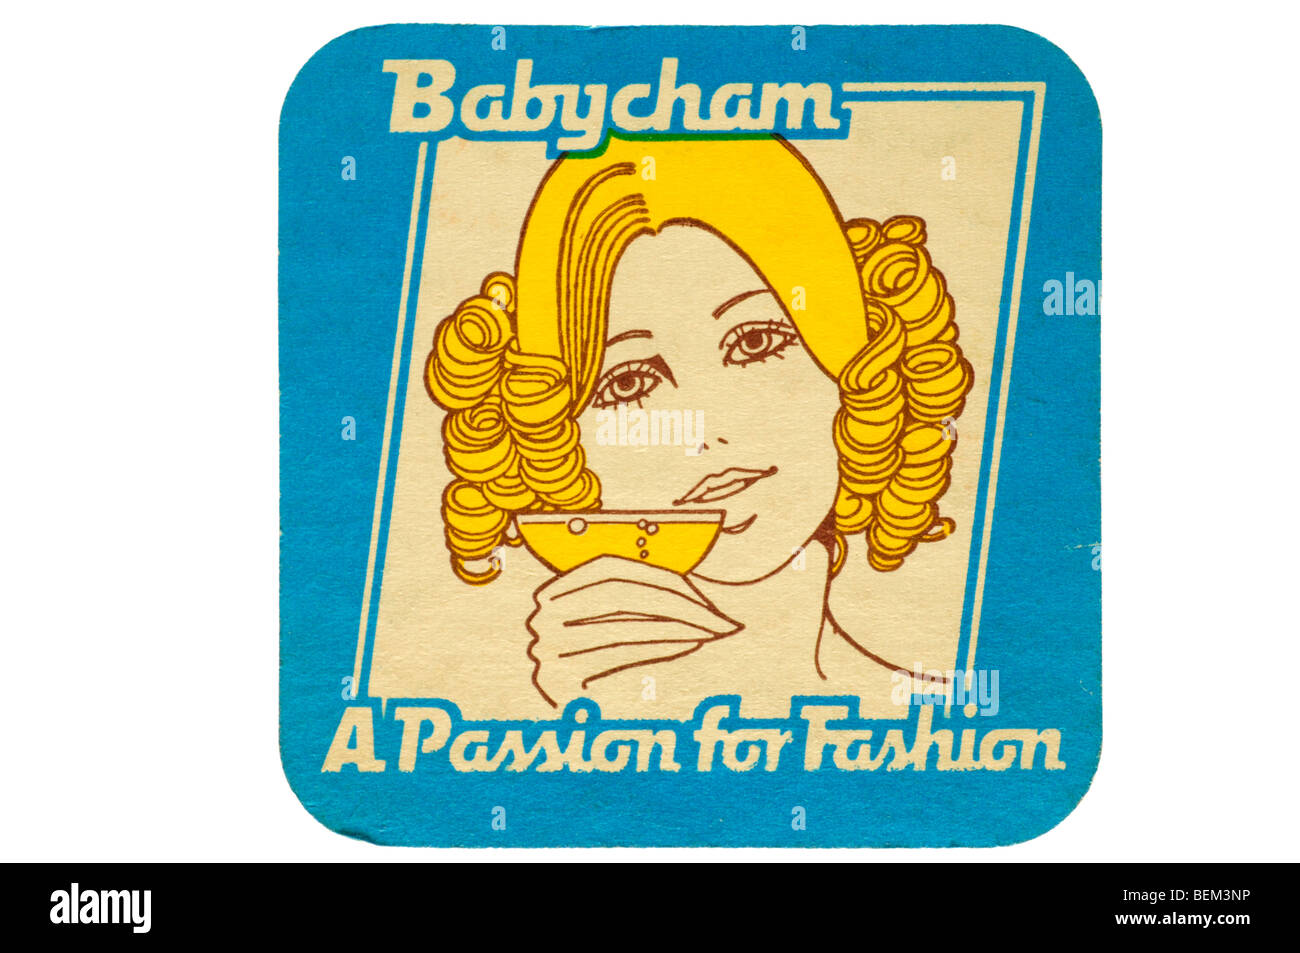 babycham a passion for fashion Stock Photo